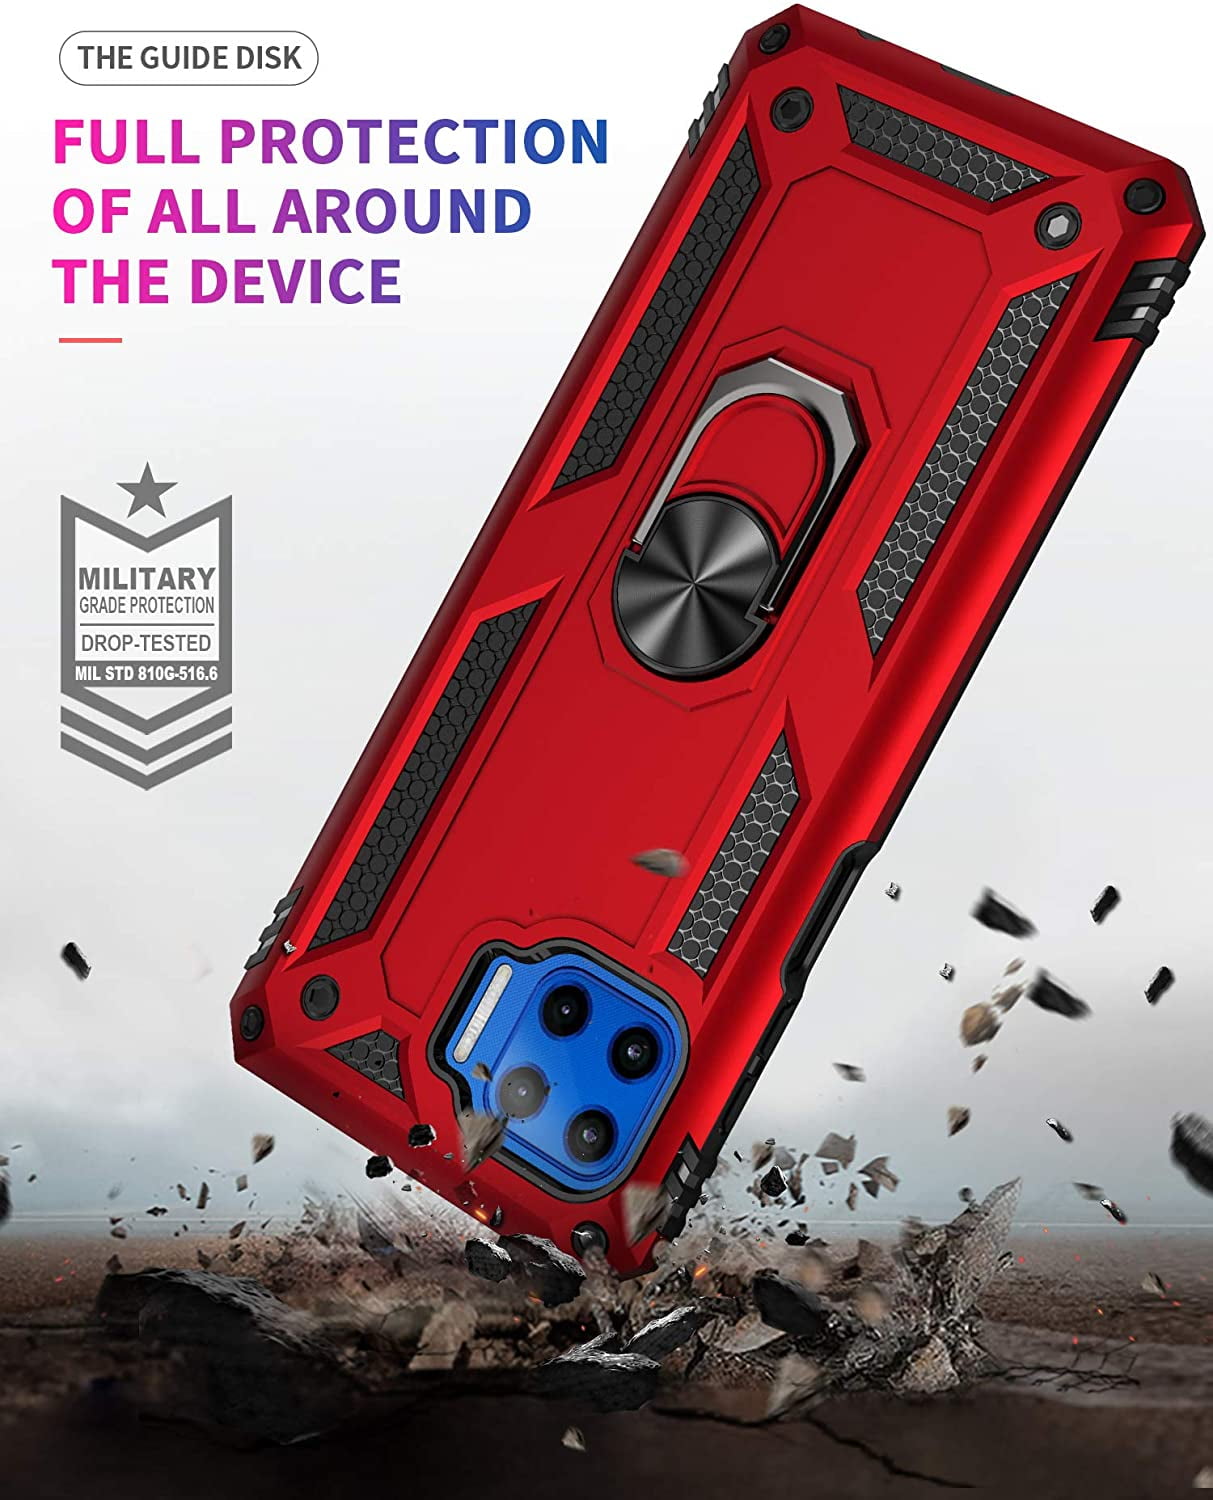 Moto One 5G Case,Motorola One 5G UW Case,PUSHIMEI Military Grade Armor Protection Phone Case Cover with HD Screen Protector Magnetic Ring Kickstand for Motorola Moto One 5G Red Military Case 